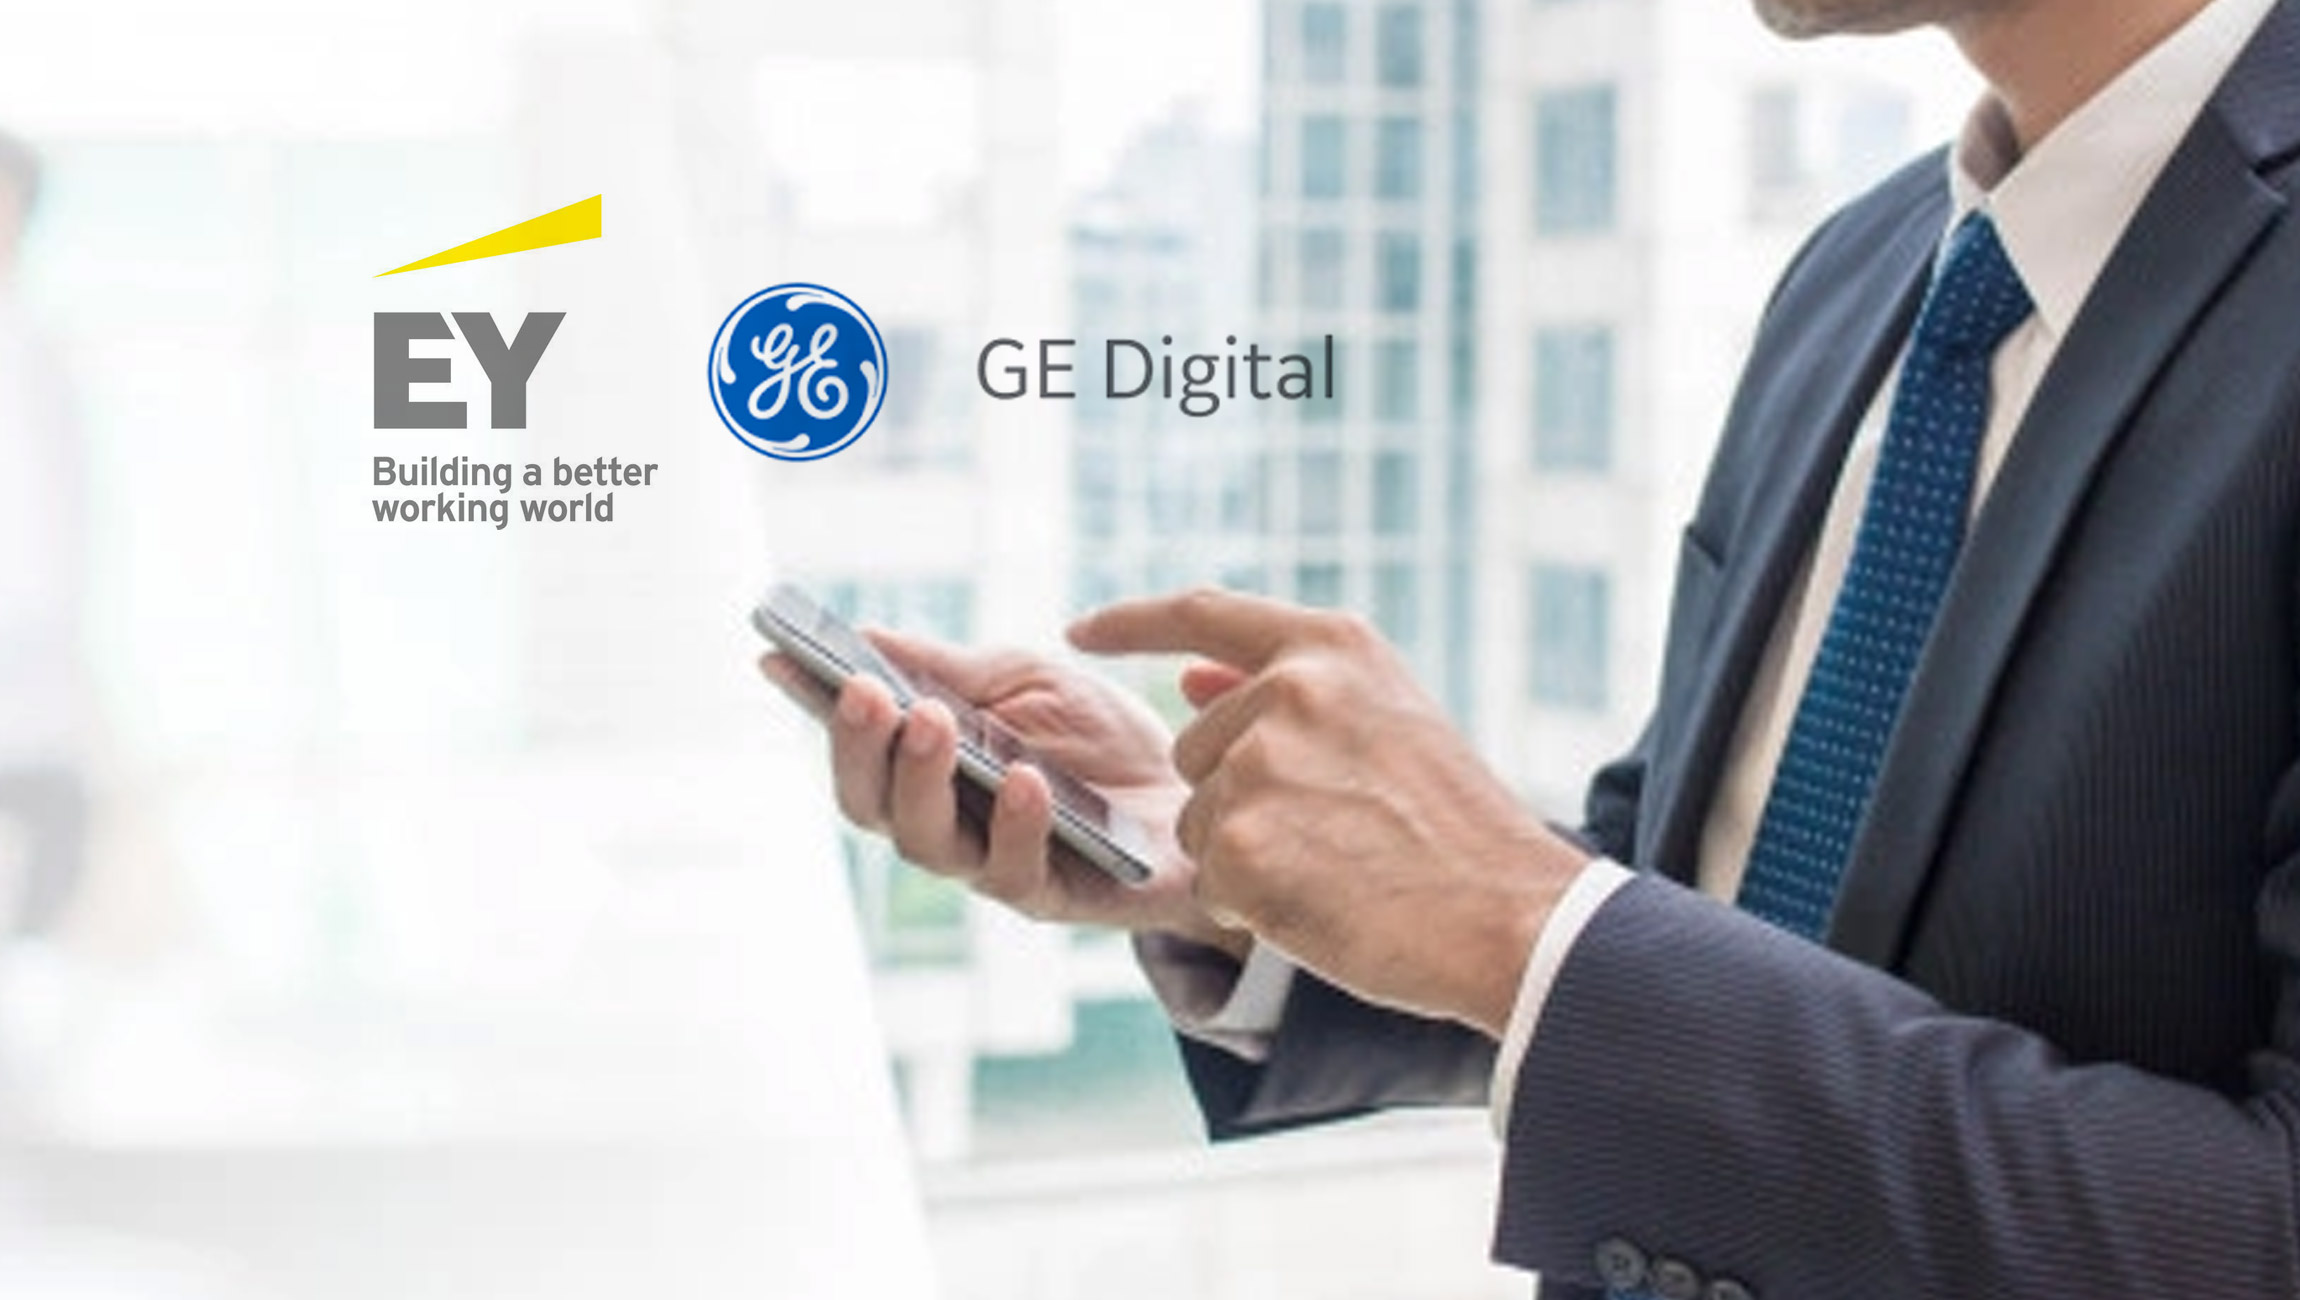 EY and GE Digital Announce Alliance to Help Organizations Improve Productivity Through Data-Driven Manufacturing